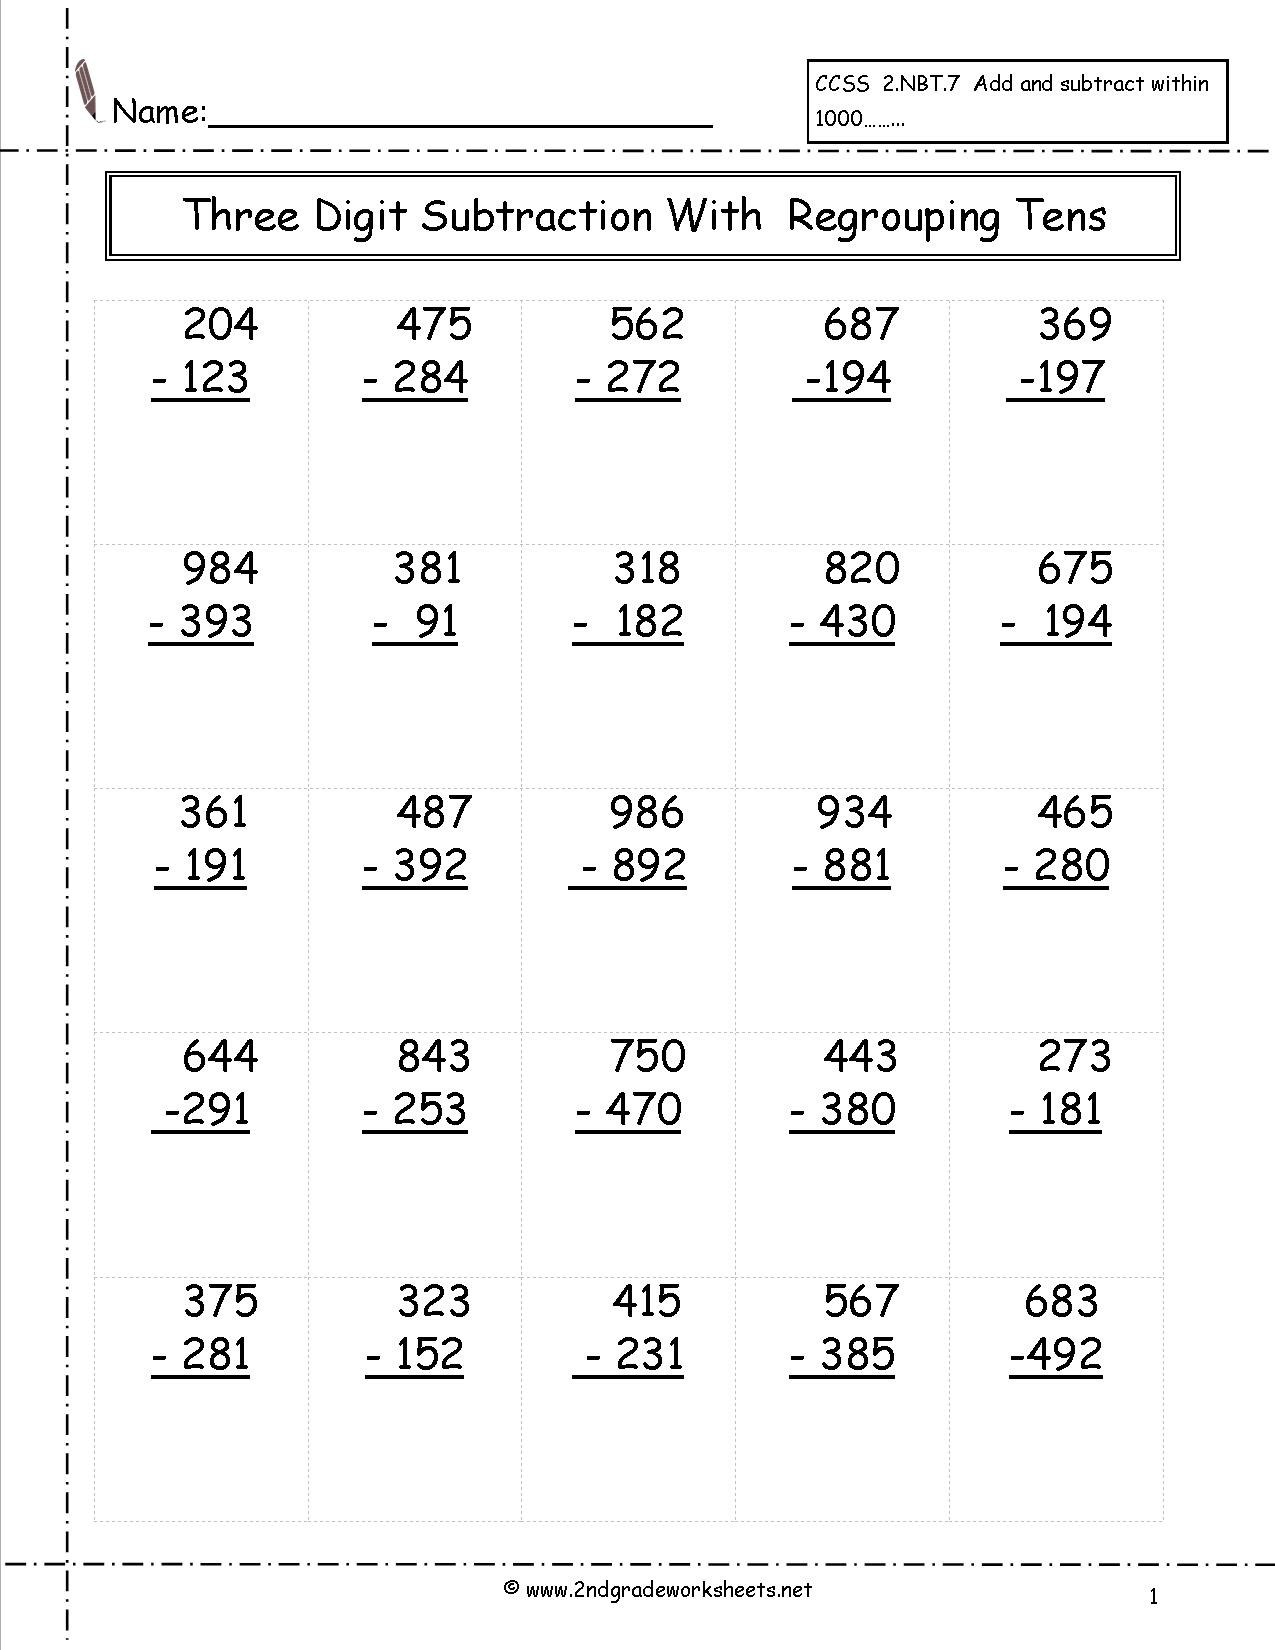 Three Digit Subtraction Worksheets - Free Printable 3 Digit Subtraction With Regrouping Worksheets